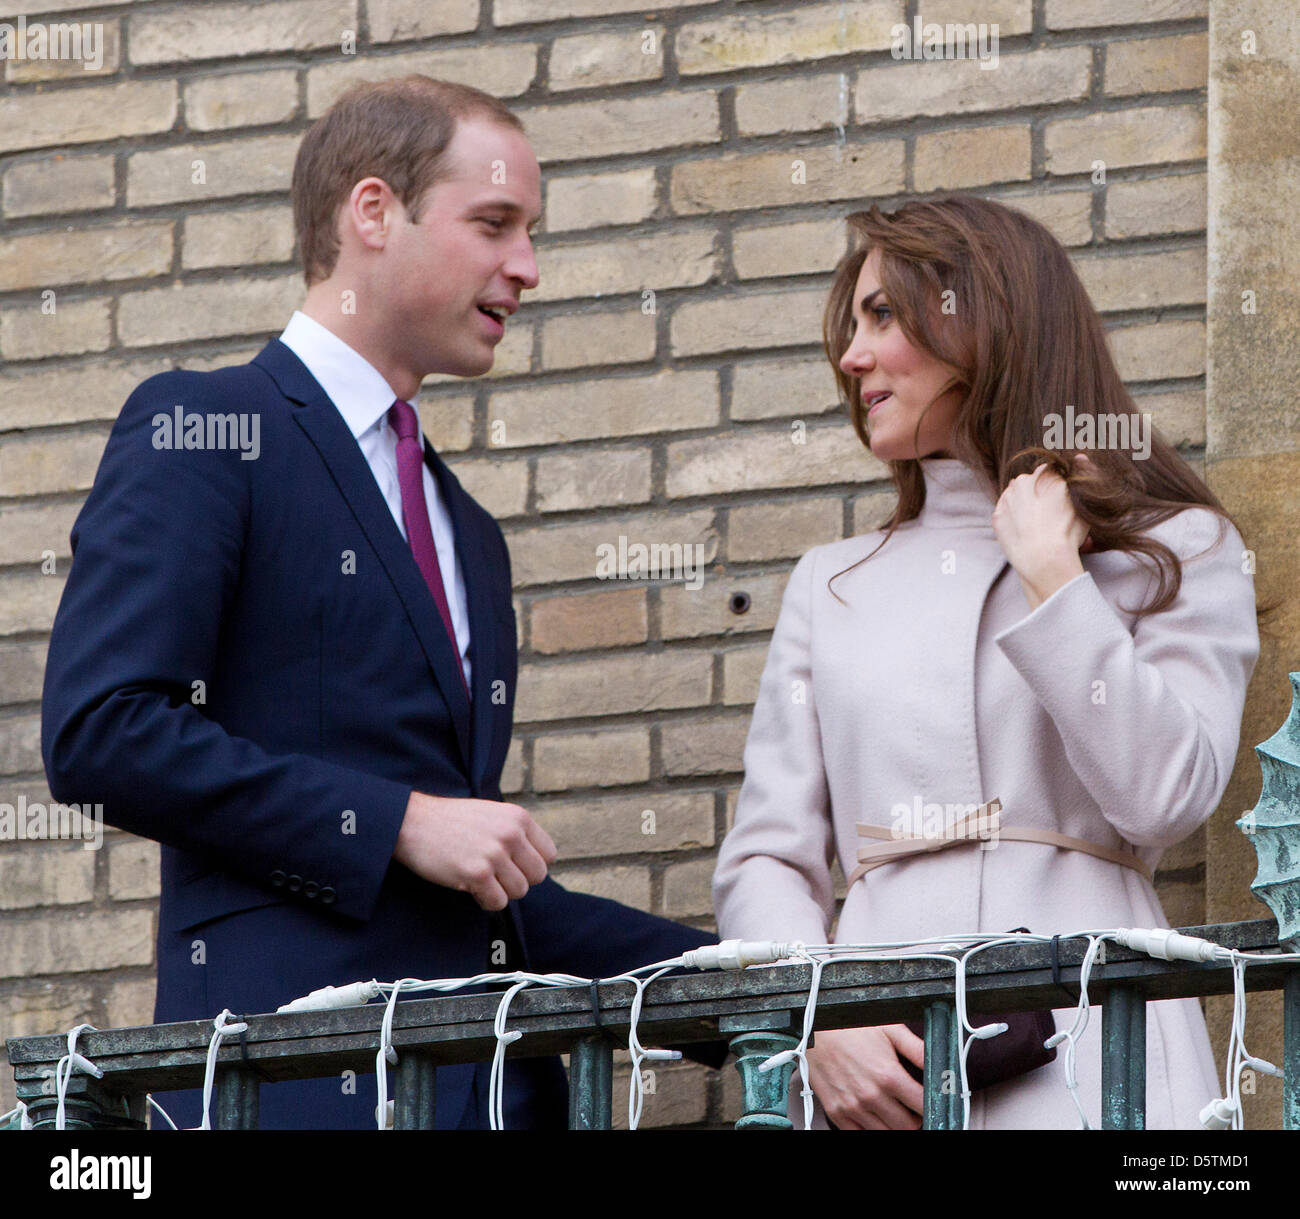 Britain's Prince William and Catherine, The Duke and Duchess of Cambridge visit the Guildhall in Cambridge, United Kingdom, 28 November 2012. Photo: Patrick van Katwijk - NETHERLANDS OUT Stock Photo